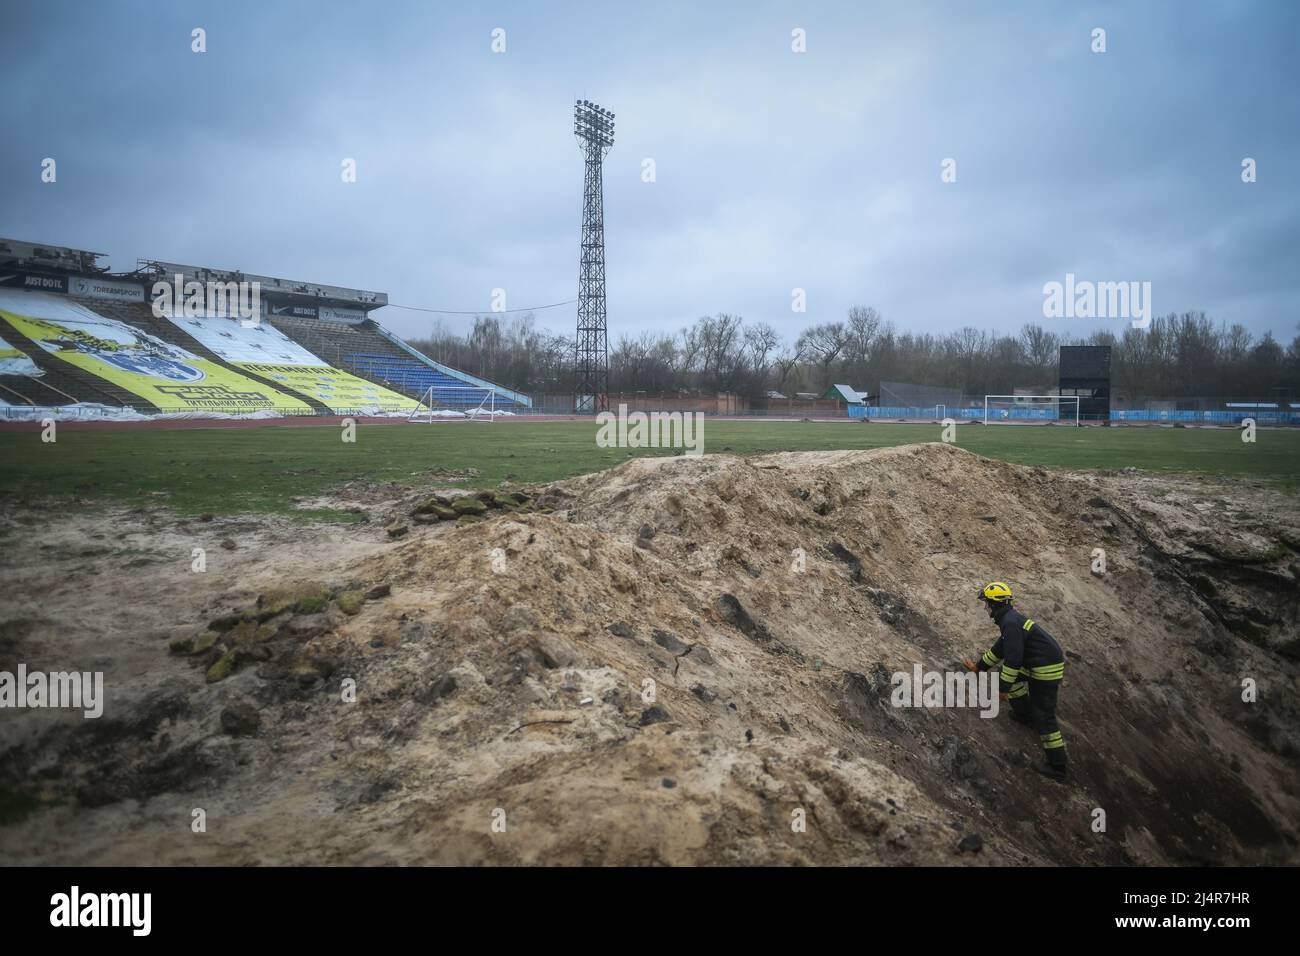 A fire fighter inspects a crater in a football pitch at the stadium a residential area of Chernihiv, Ukraine damaged by shelling during the Russian invasion on April 16, 2022. Russian military forces entered Ukraine territory on Feb. 24, 2022. (Photo by Piero Cruciatti/Sipa USA) Stock Photo